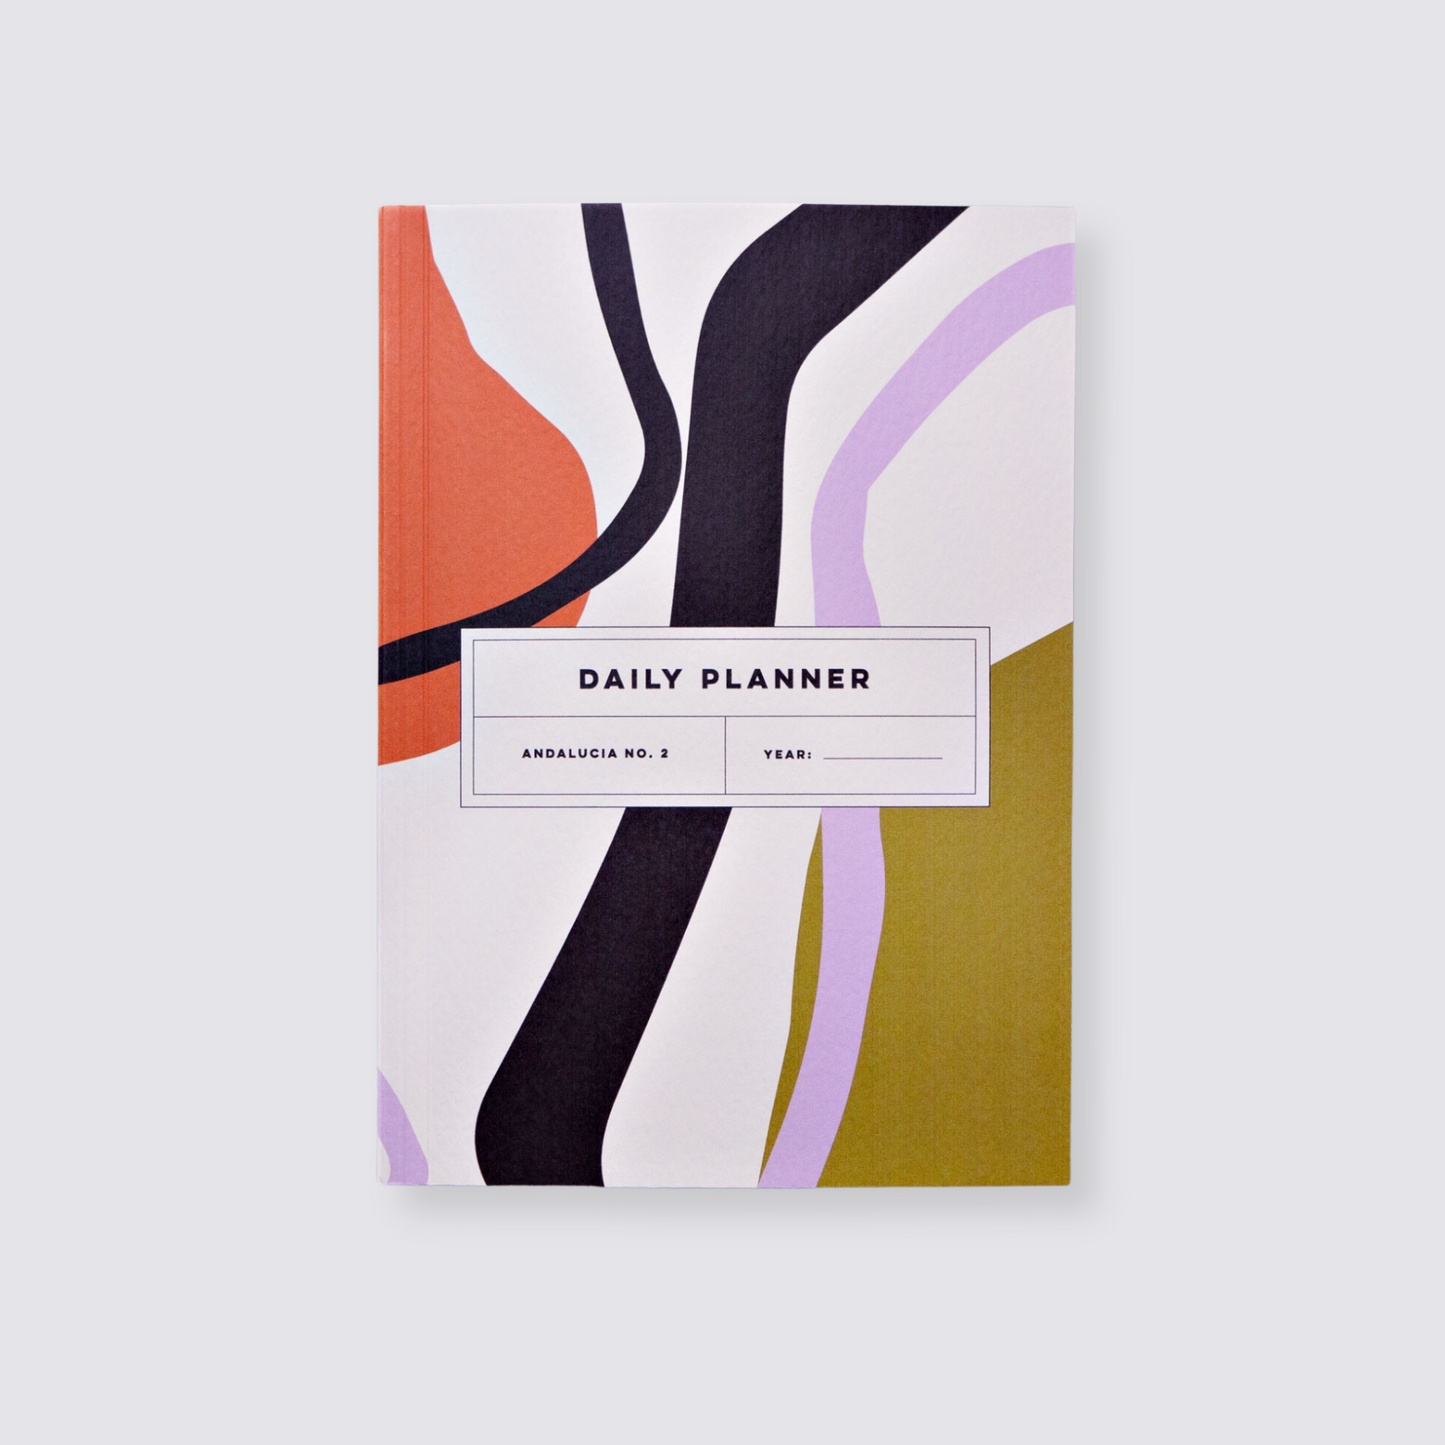 The completist undated daily planner